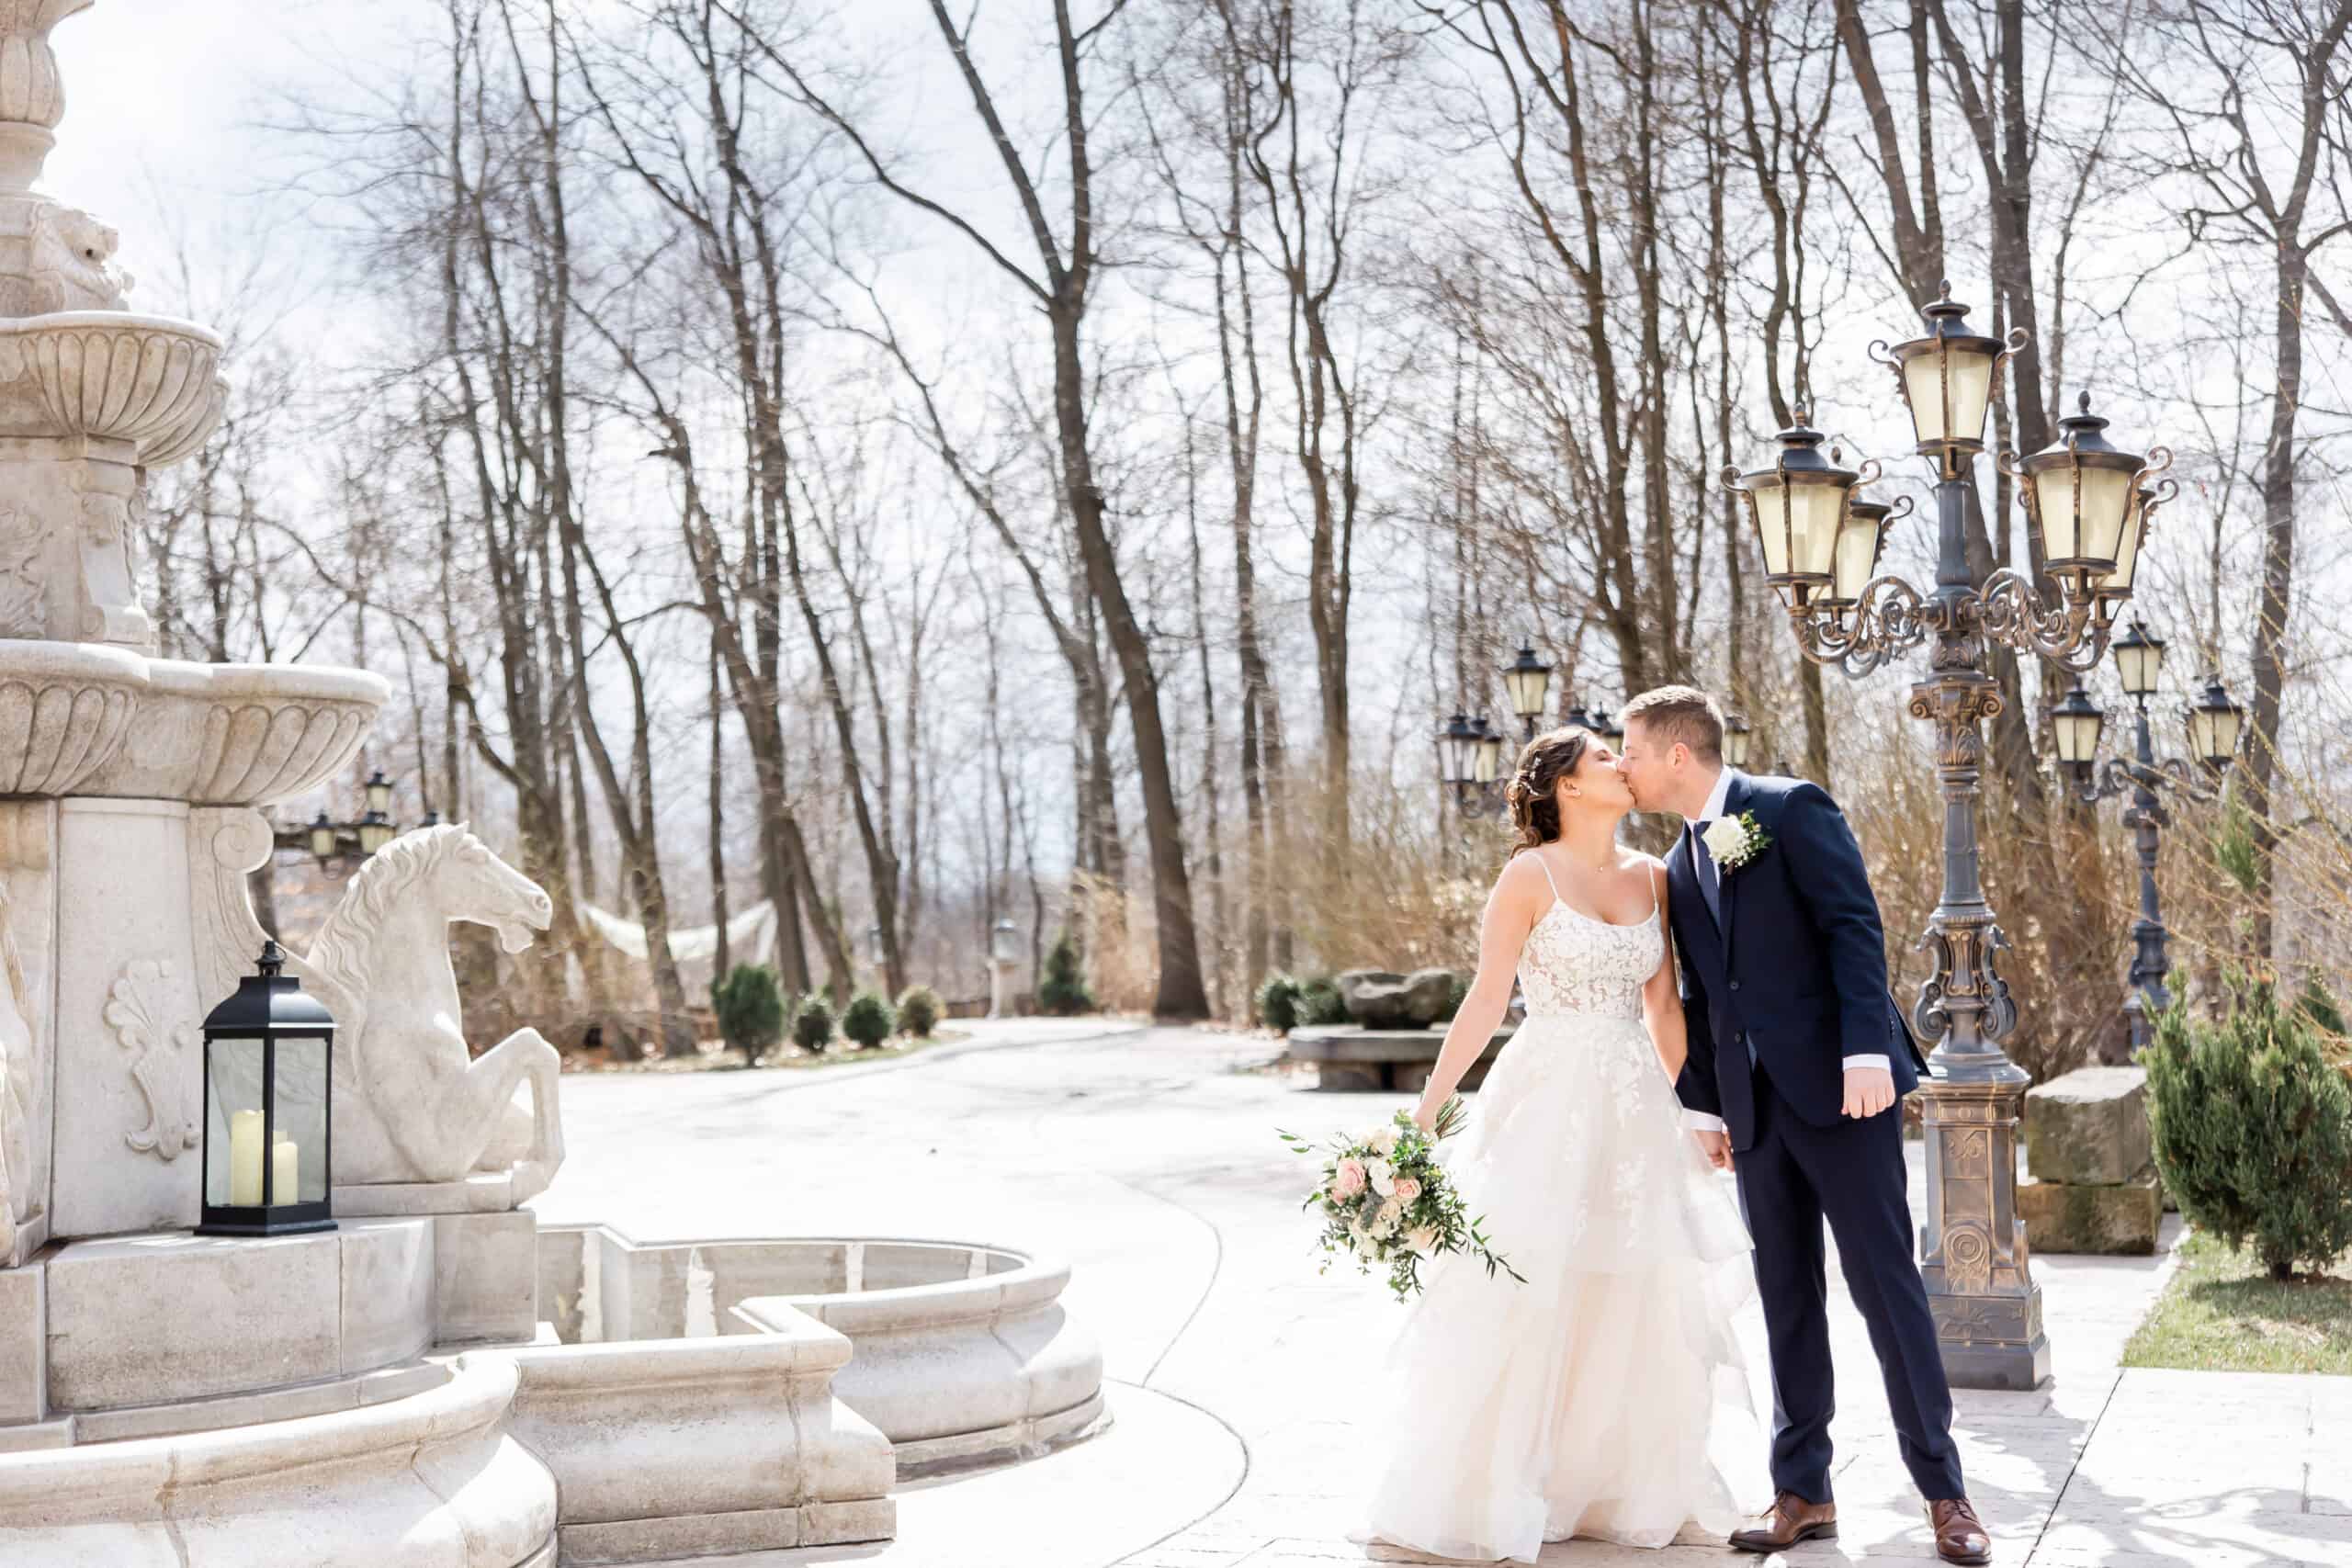 Snowy wedding day at bella amore with bride and groom standing by fountain